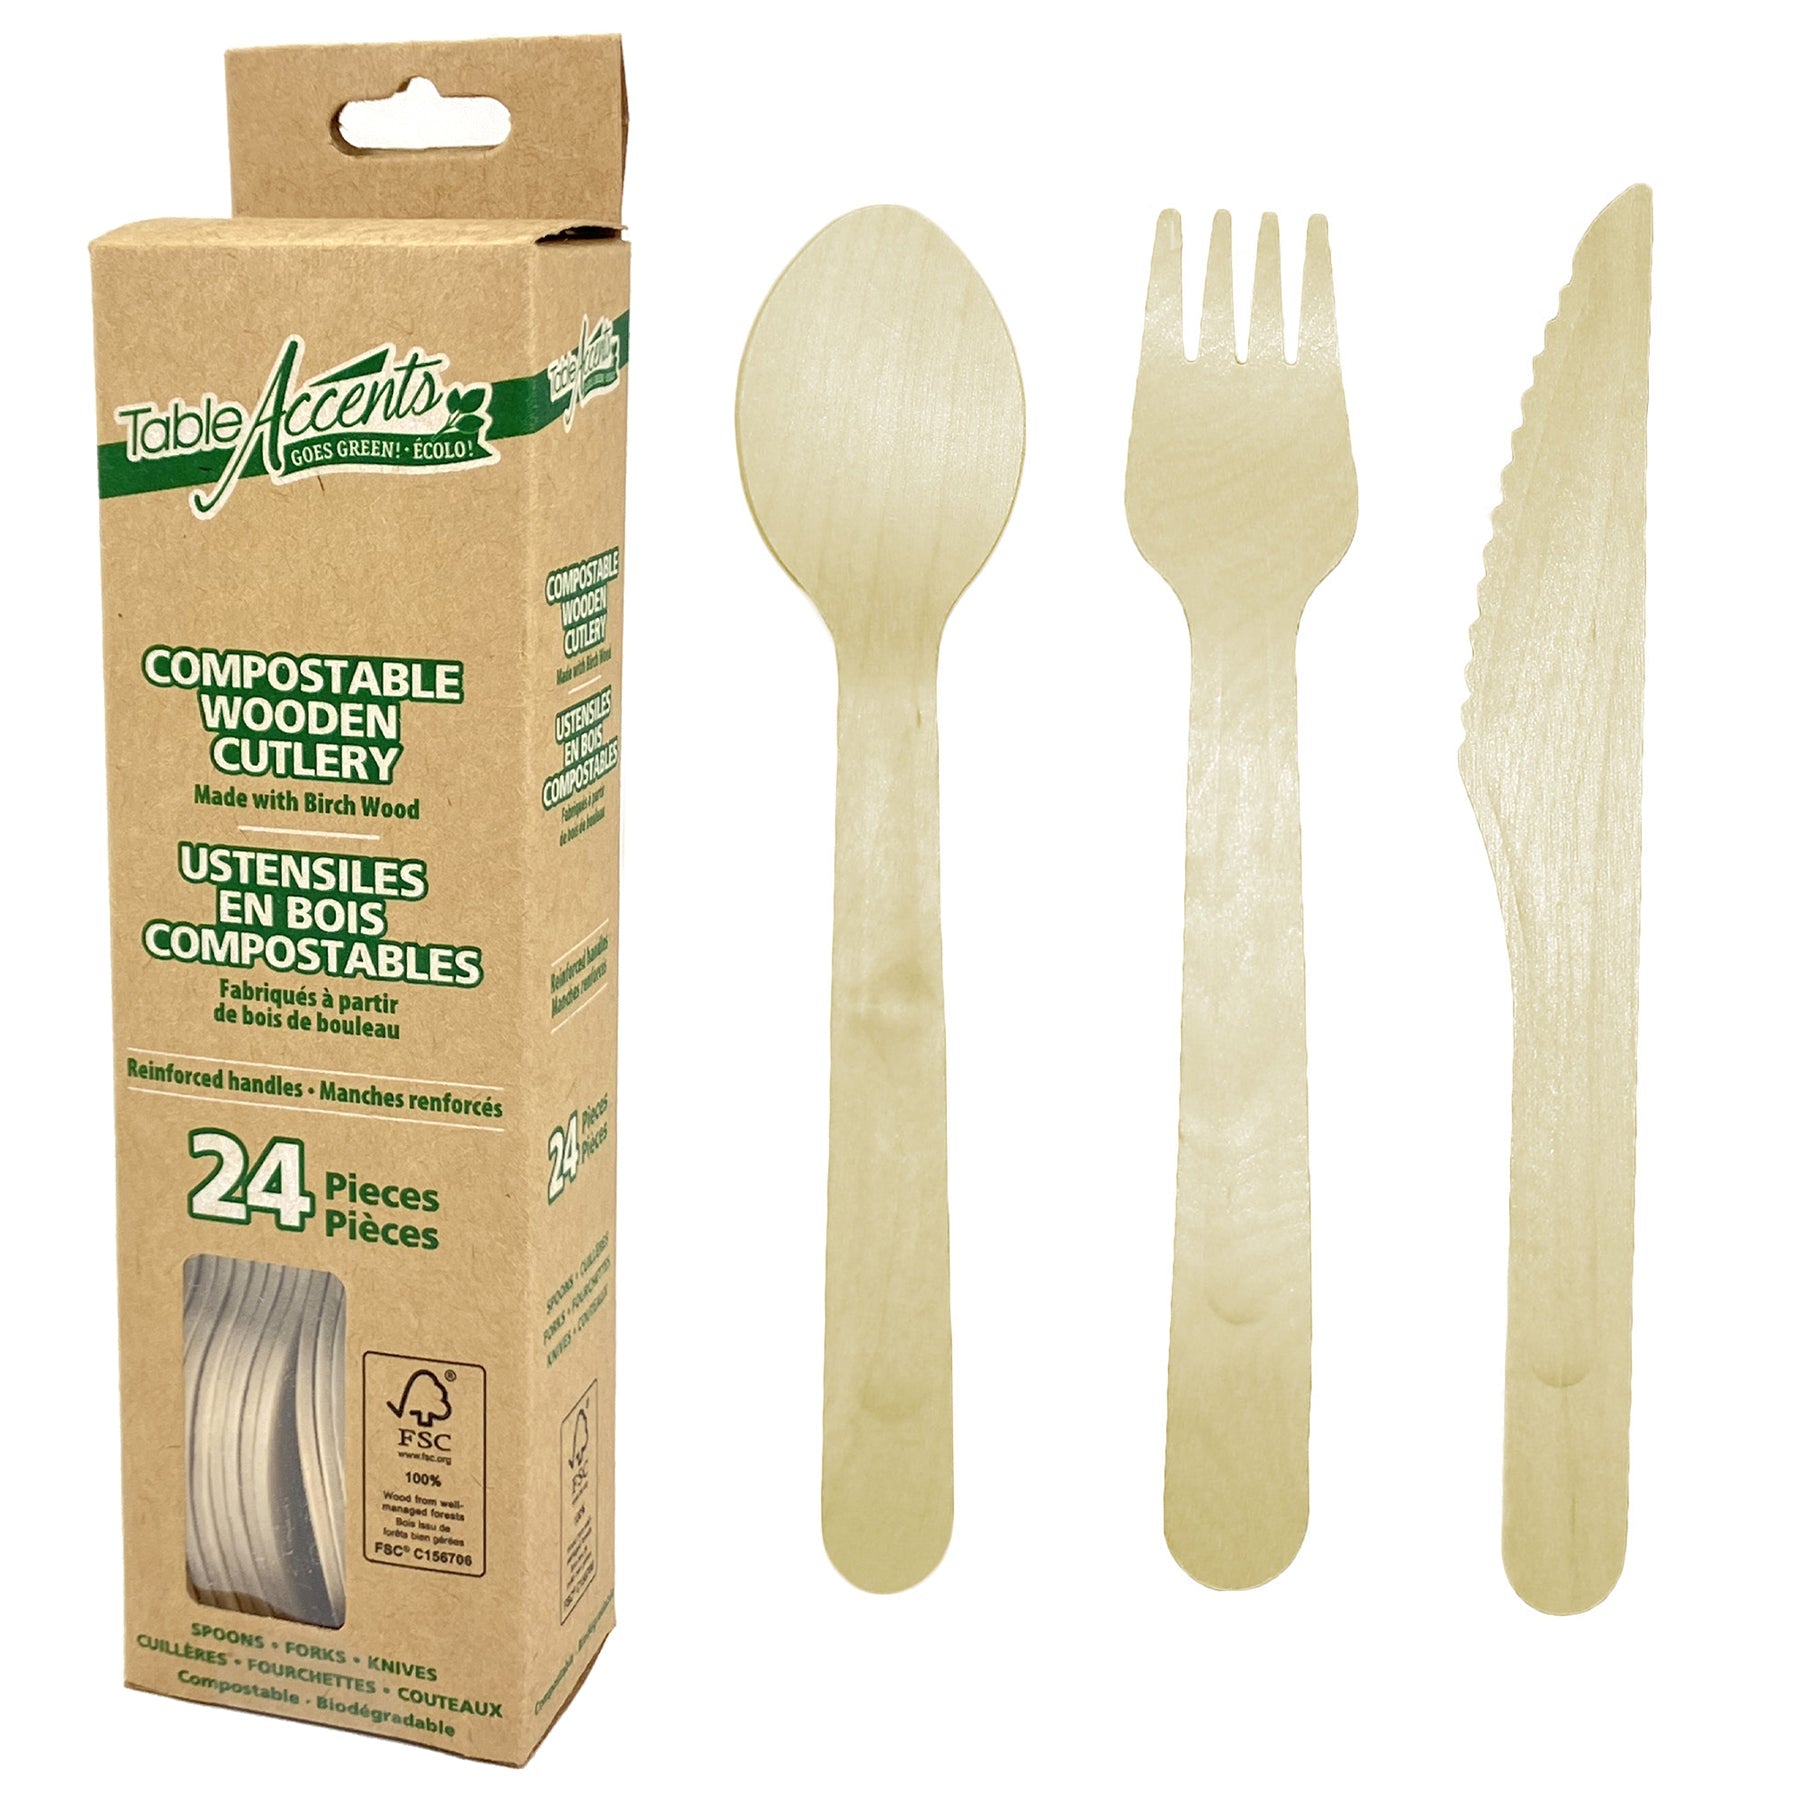 Table Accents 24pcs Compostable Wooden Cutlery 6.25in